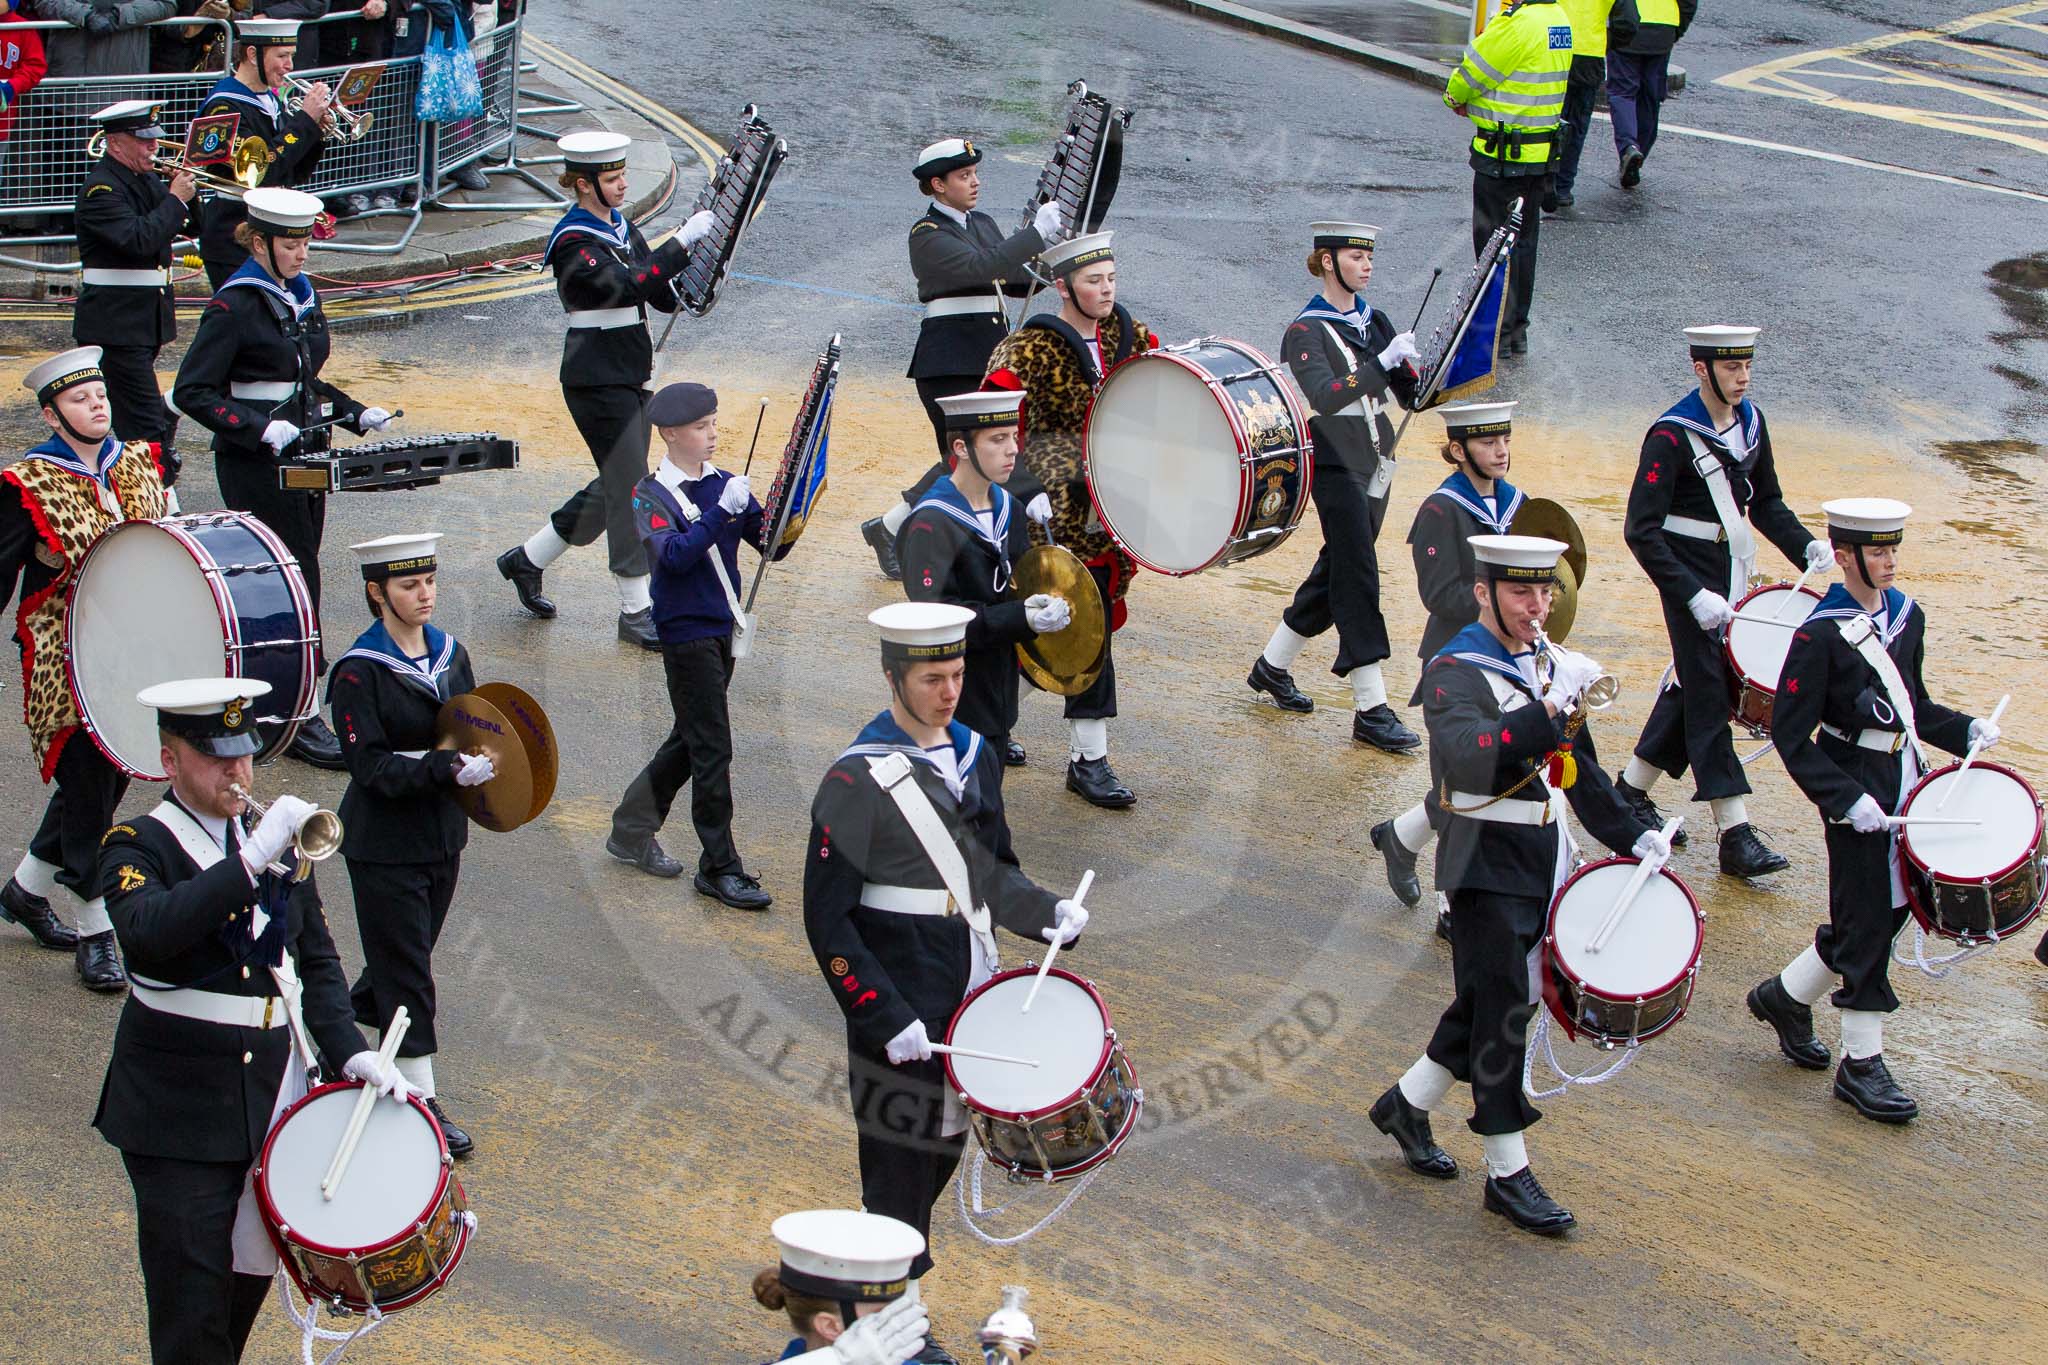 Lord Mayor's Show 2012: Entry 98 - Sea Cadet Corps Band..
Press stand opposite Mansion House, City of London,
London,
Greater London,
United Kingdom,
on 10 November 2012 at 11:45, image #1306